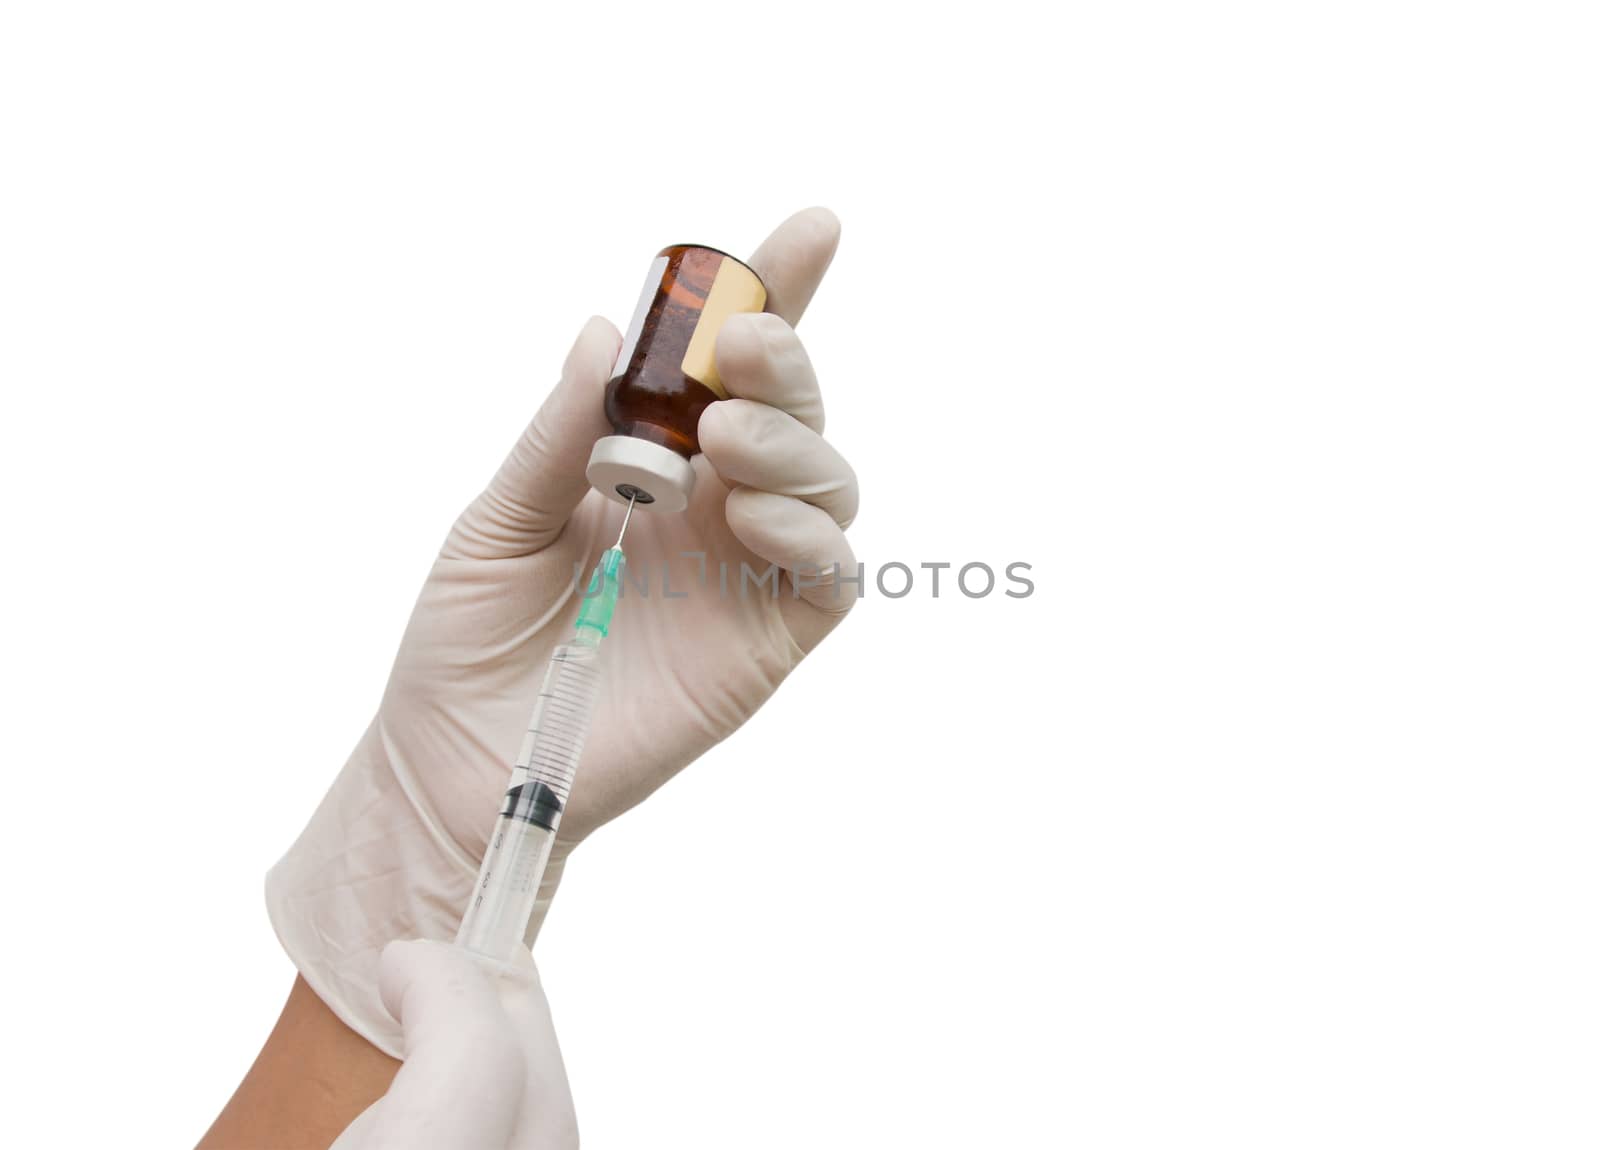 Hand holding syringe and medicine vial prepare for injection with surgical equipment and medicine isolated on white background.